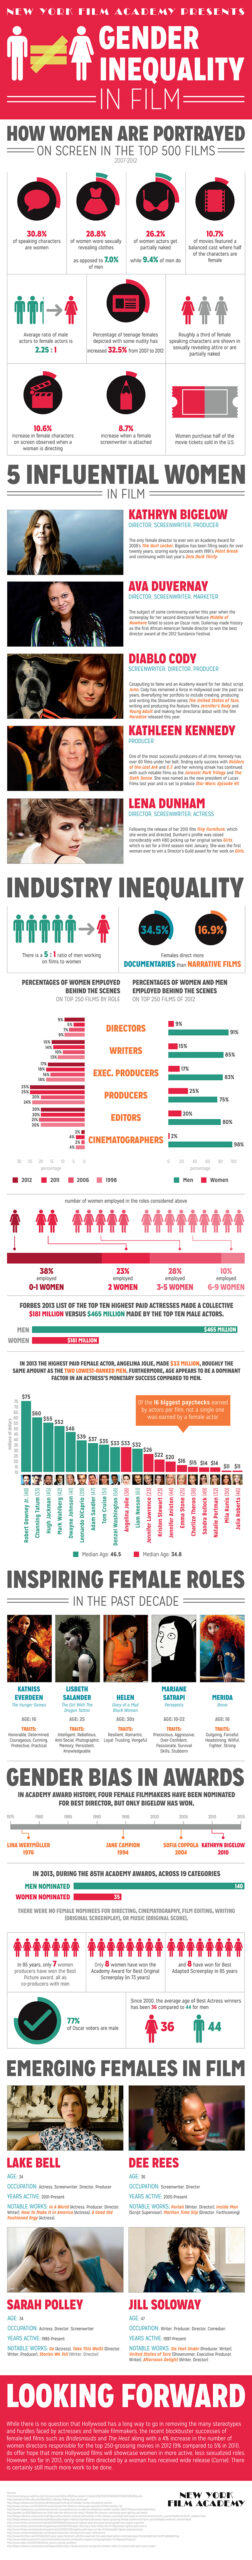 New York Film Academy's Gender Inequality in Film Infographic